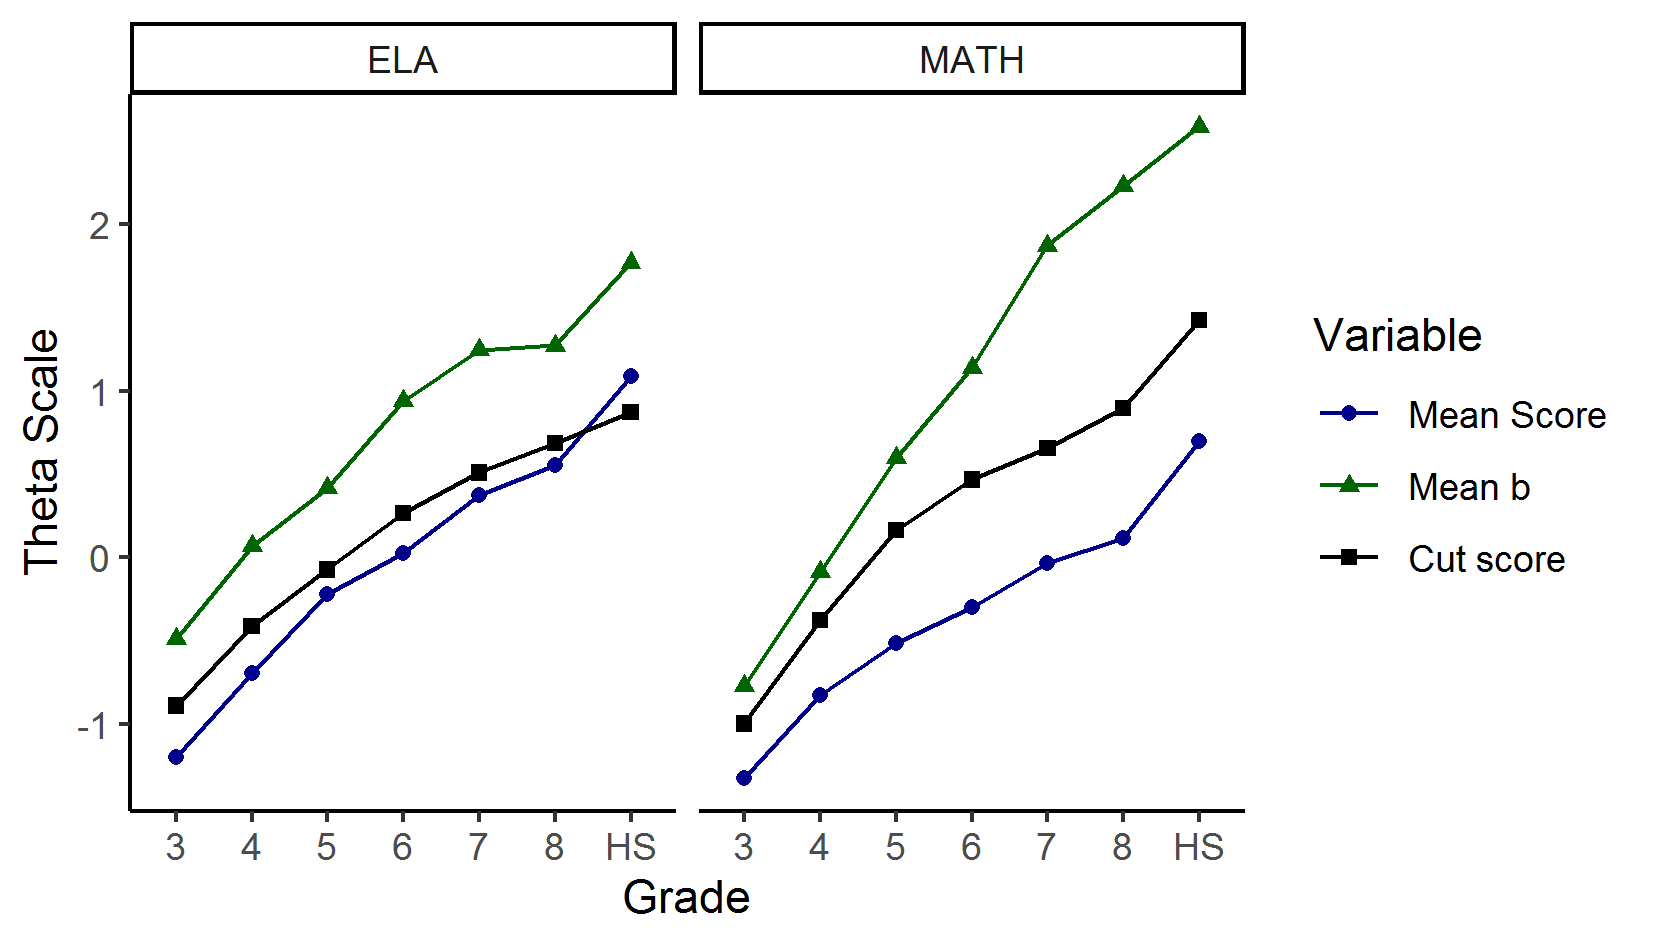 Comparison of Item Difficulty, Mean, Student Scores, and Cut Scores for ELA/Literacy and Mathematics